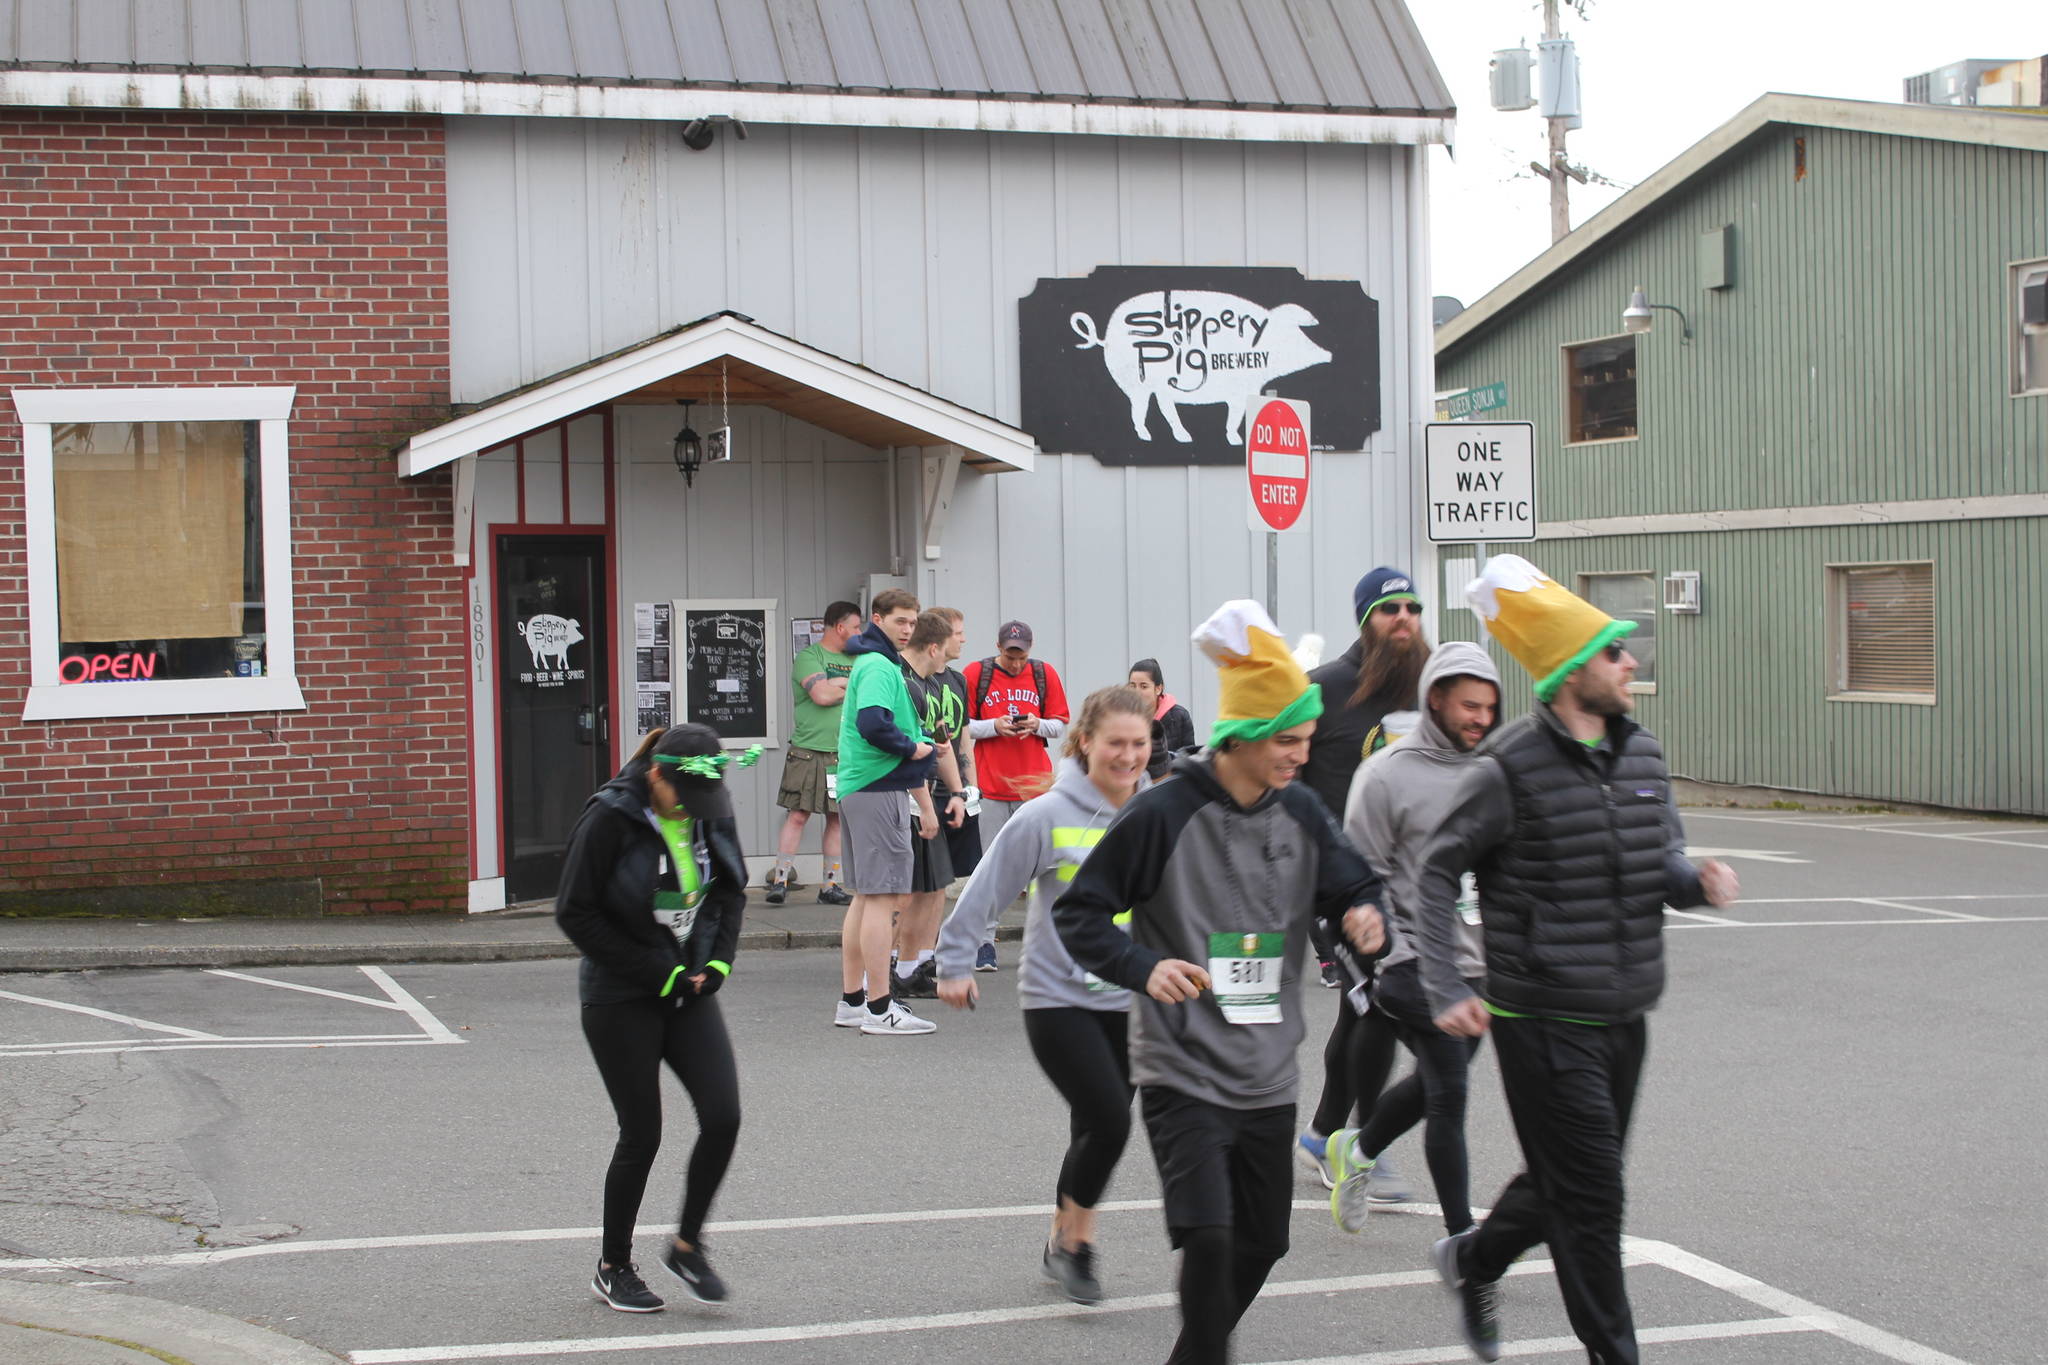 Exercising with ale: Poulsbo’s 2020 Beer Run is Saturday